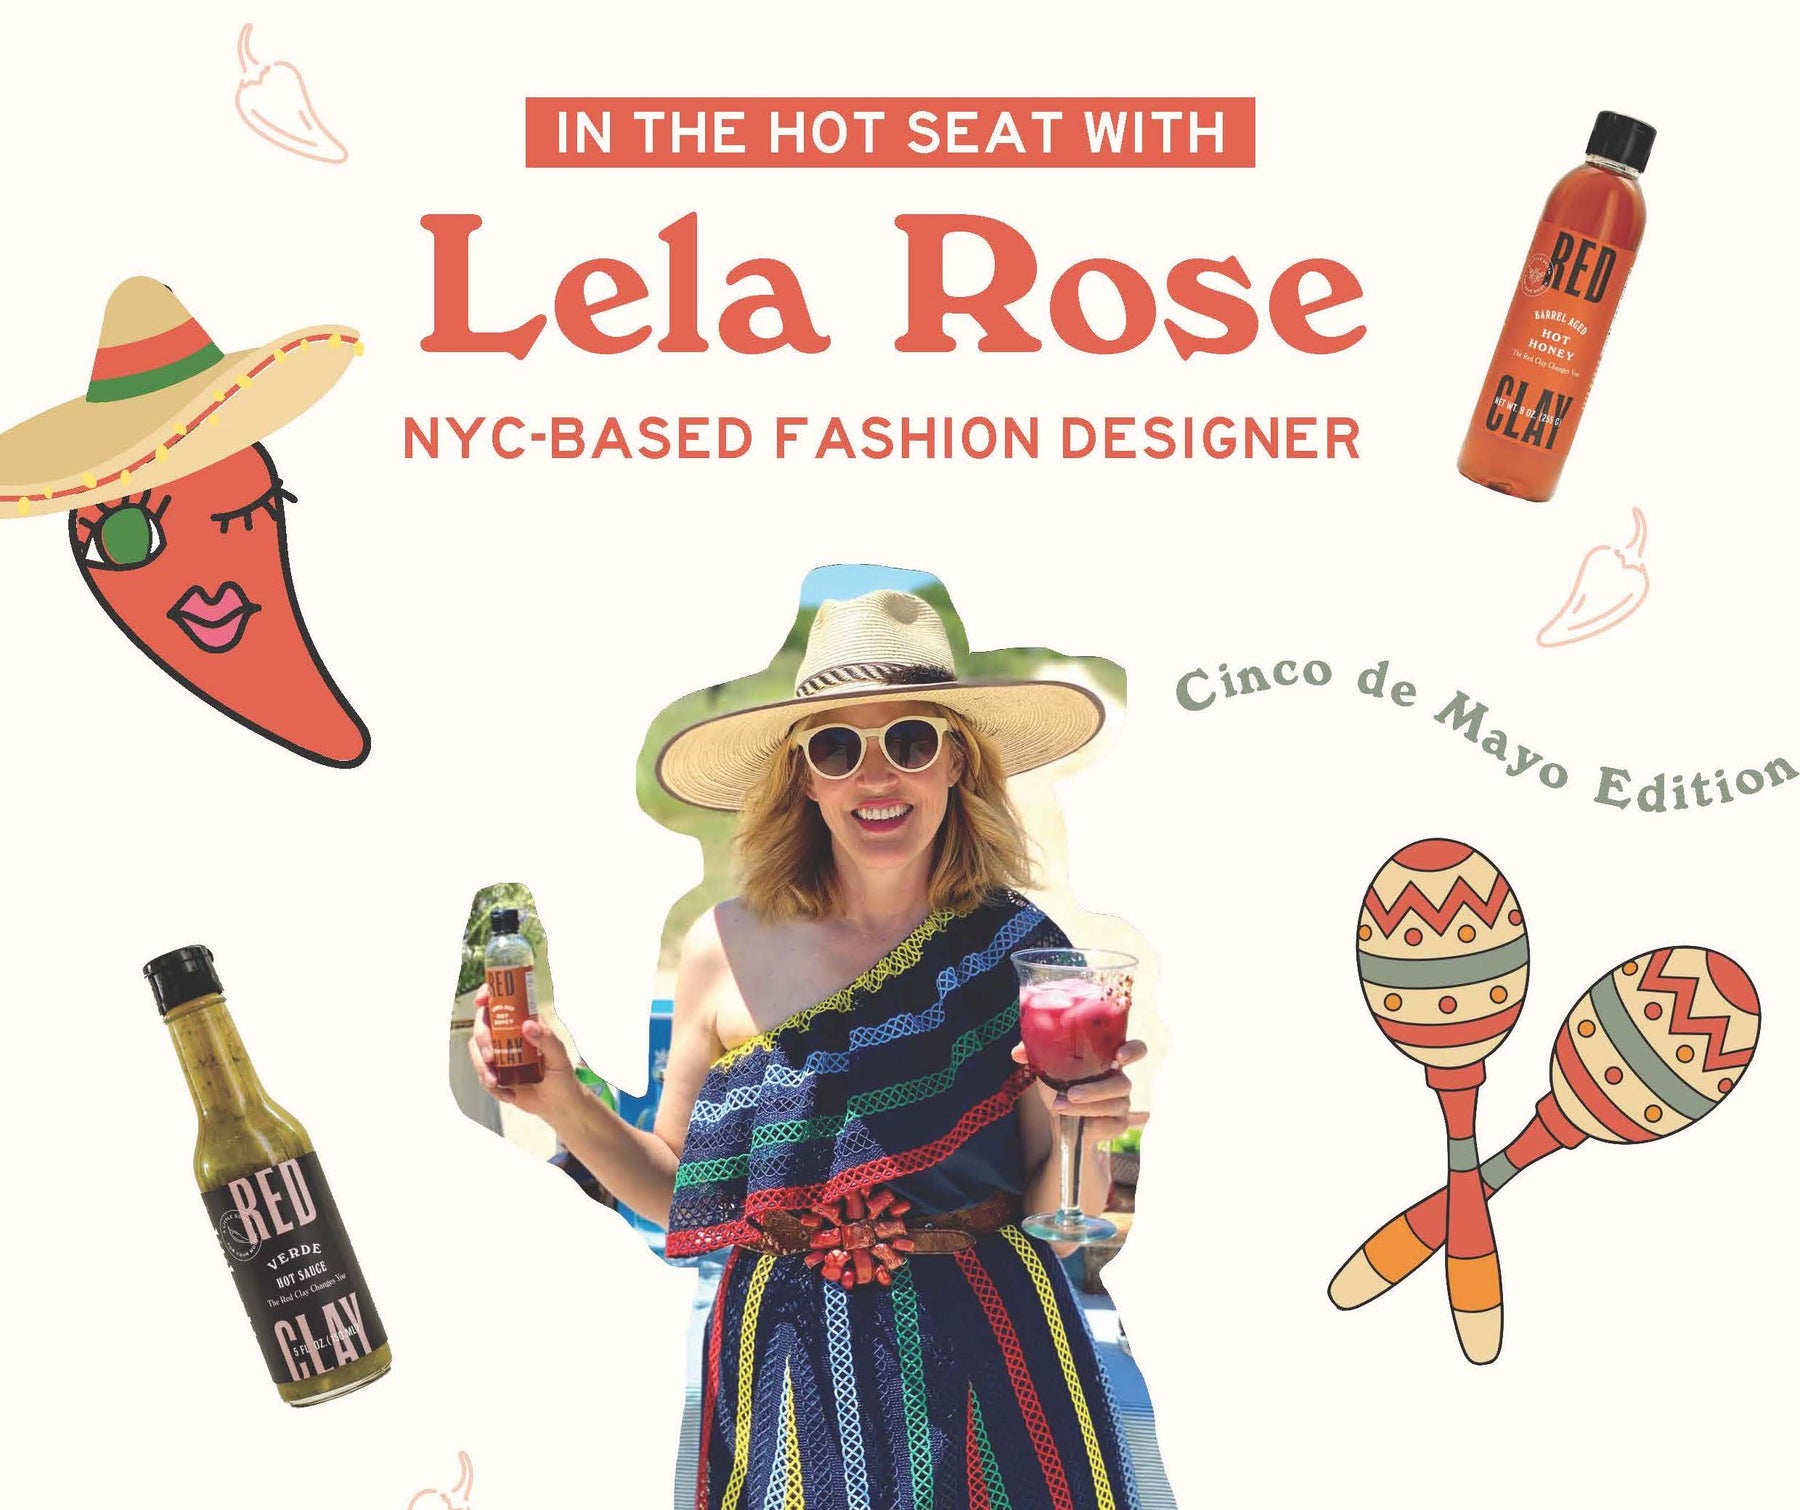 In the Hot Seat with Lela Rose